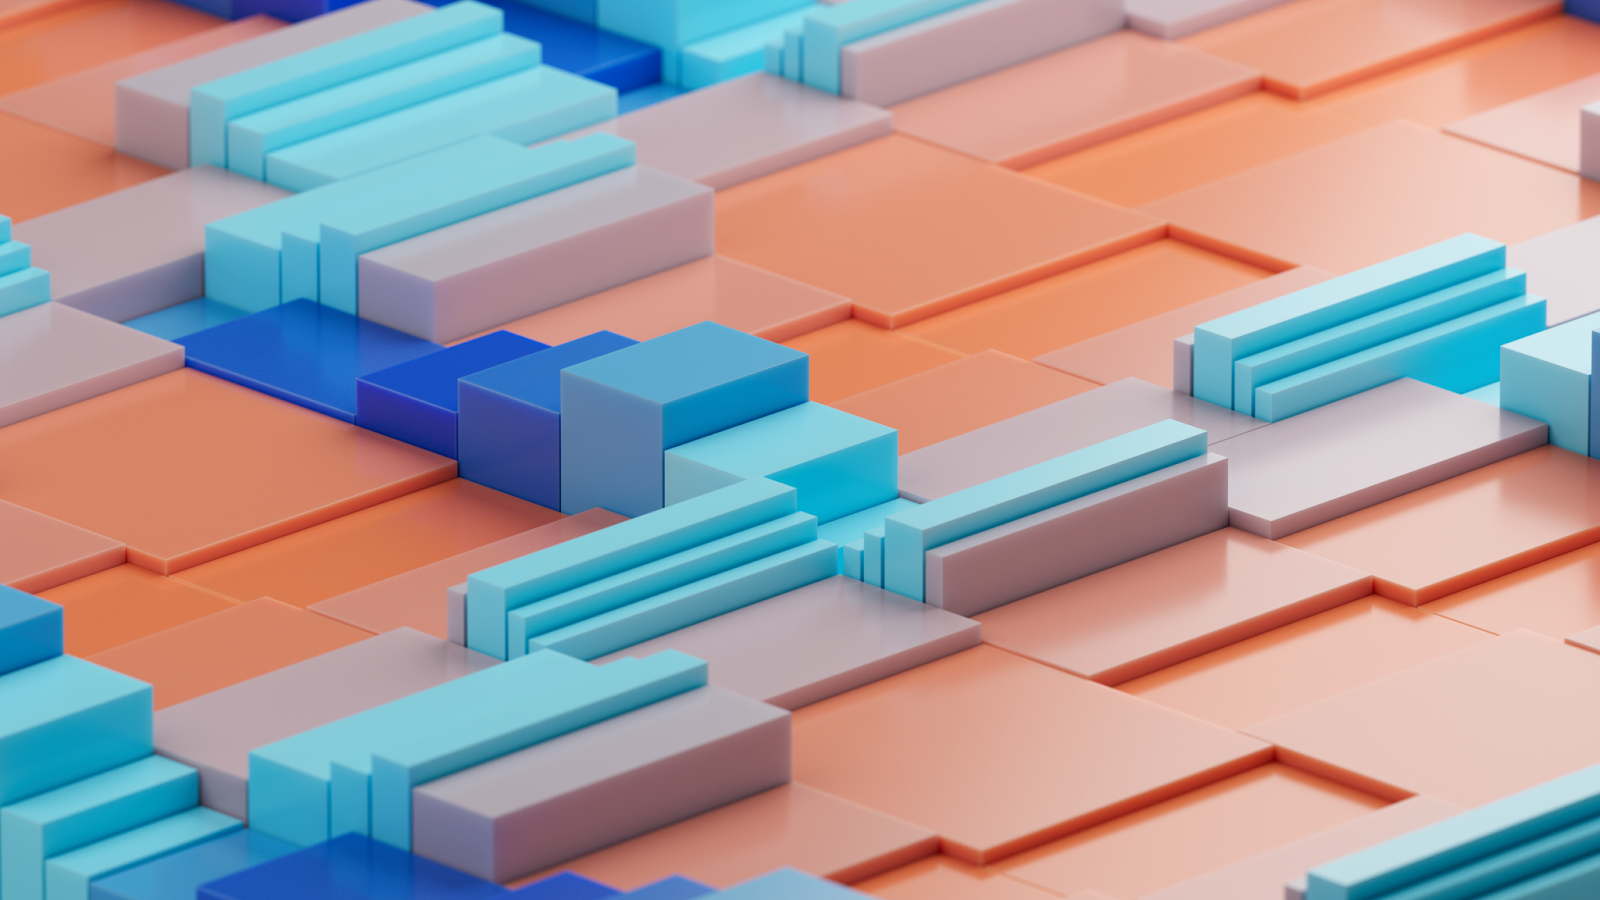 Still from the ChromaWave: Unique 3D Motion Design & Color Exploration article on Abduzeedo